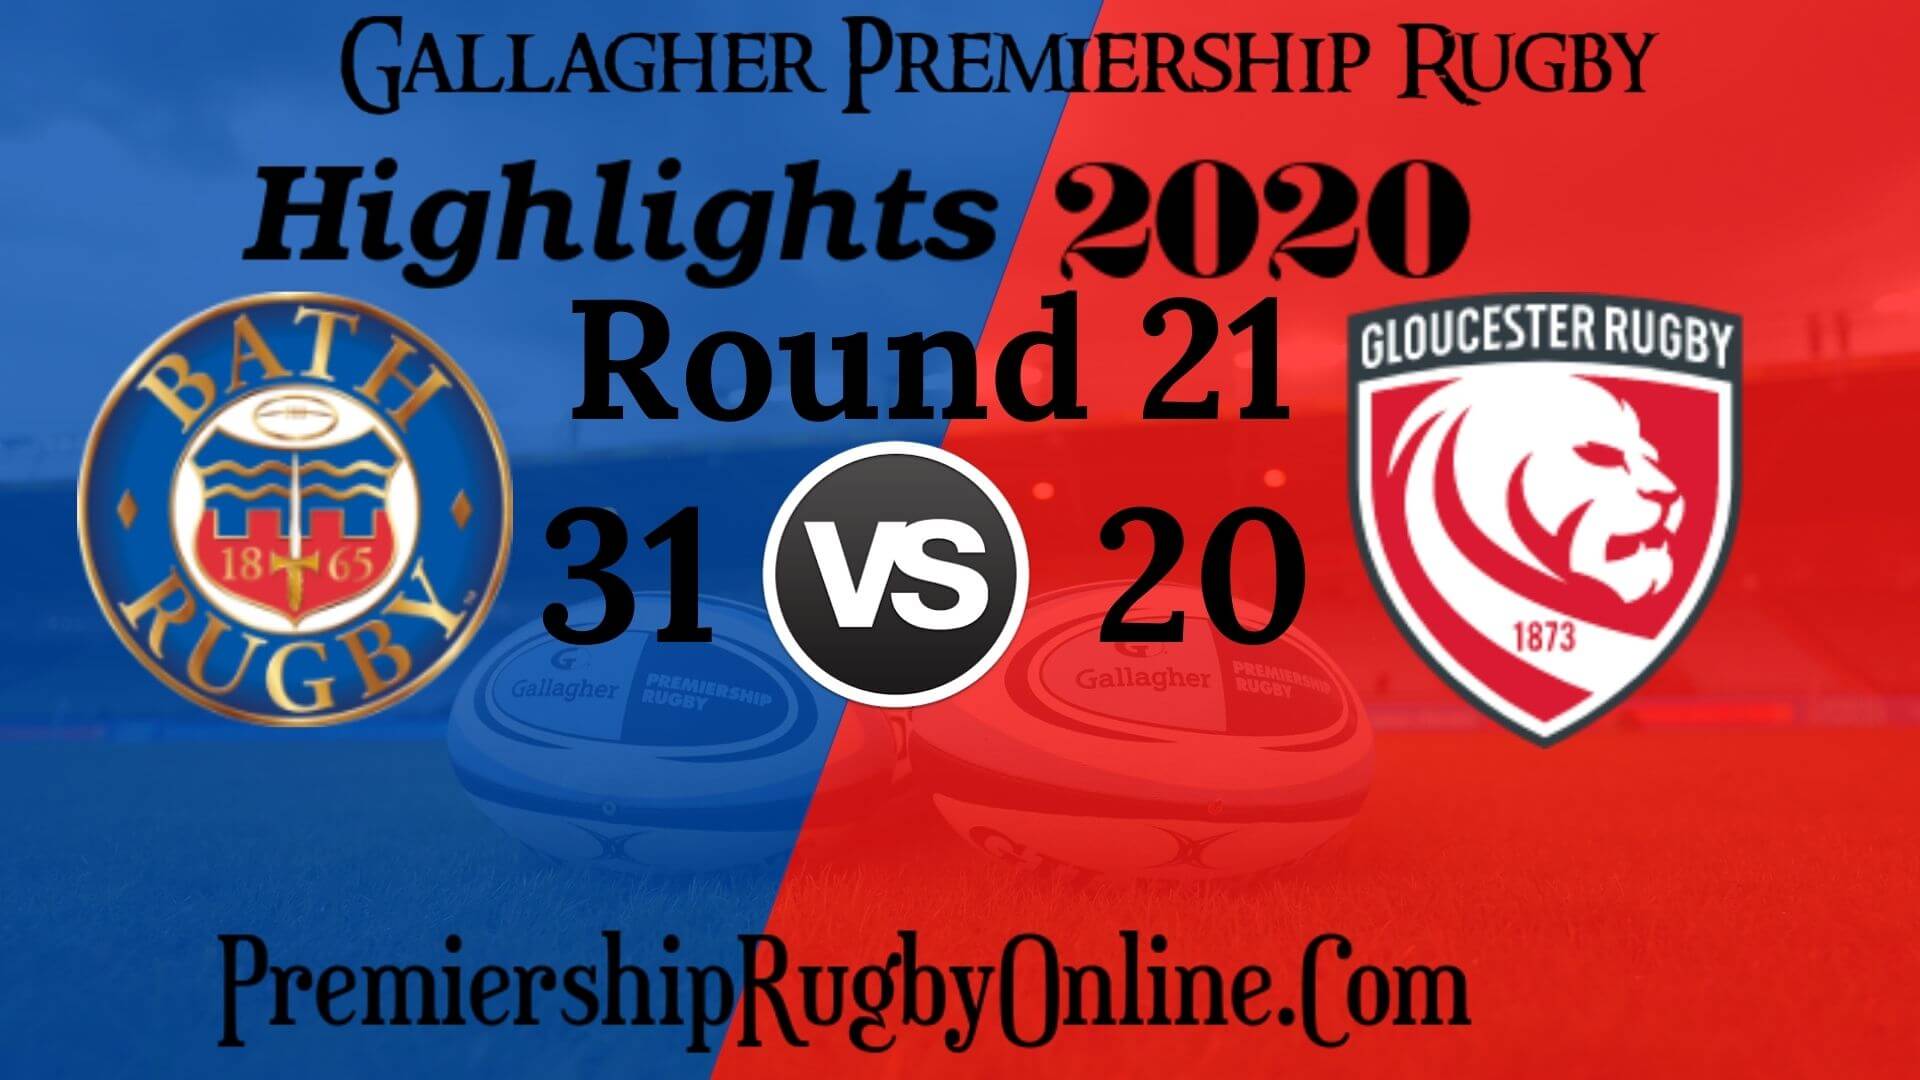 Bath Rugby vs Gloucester Rugby Highlights 2020 RD 21